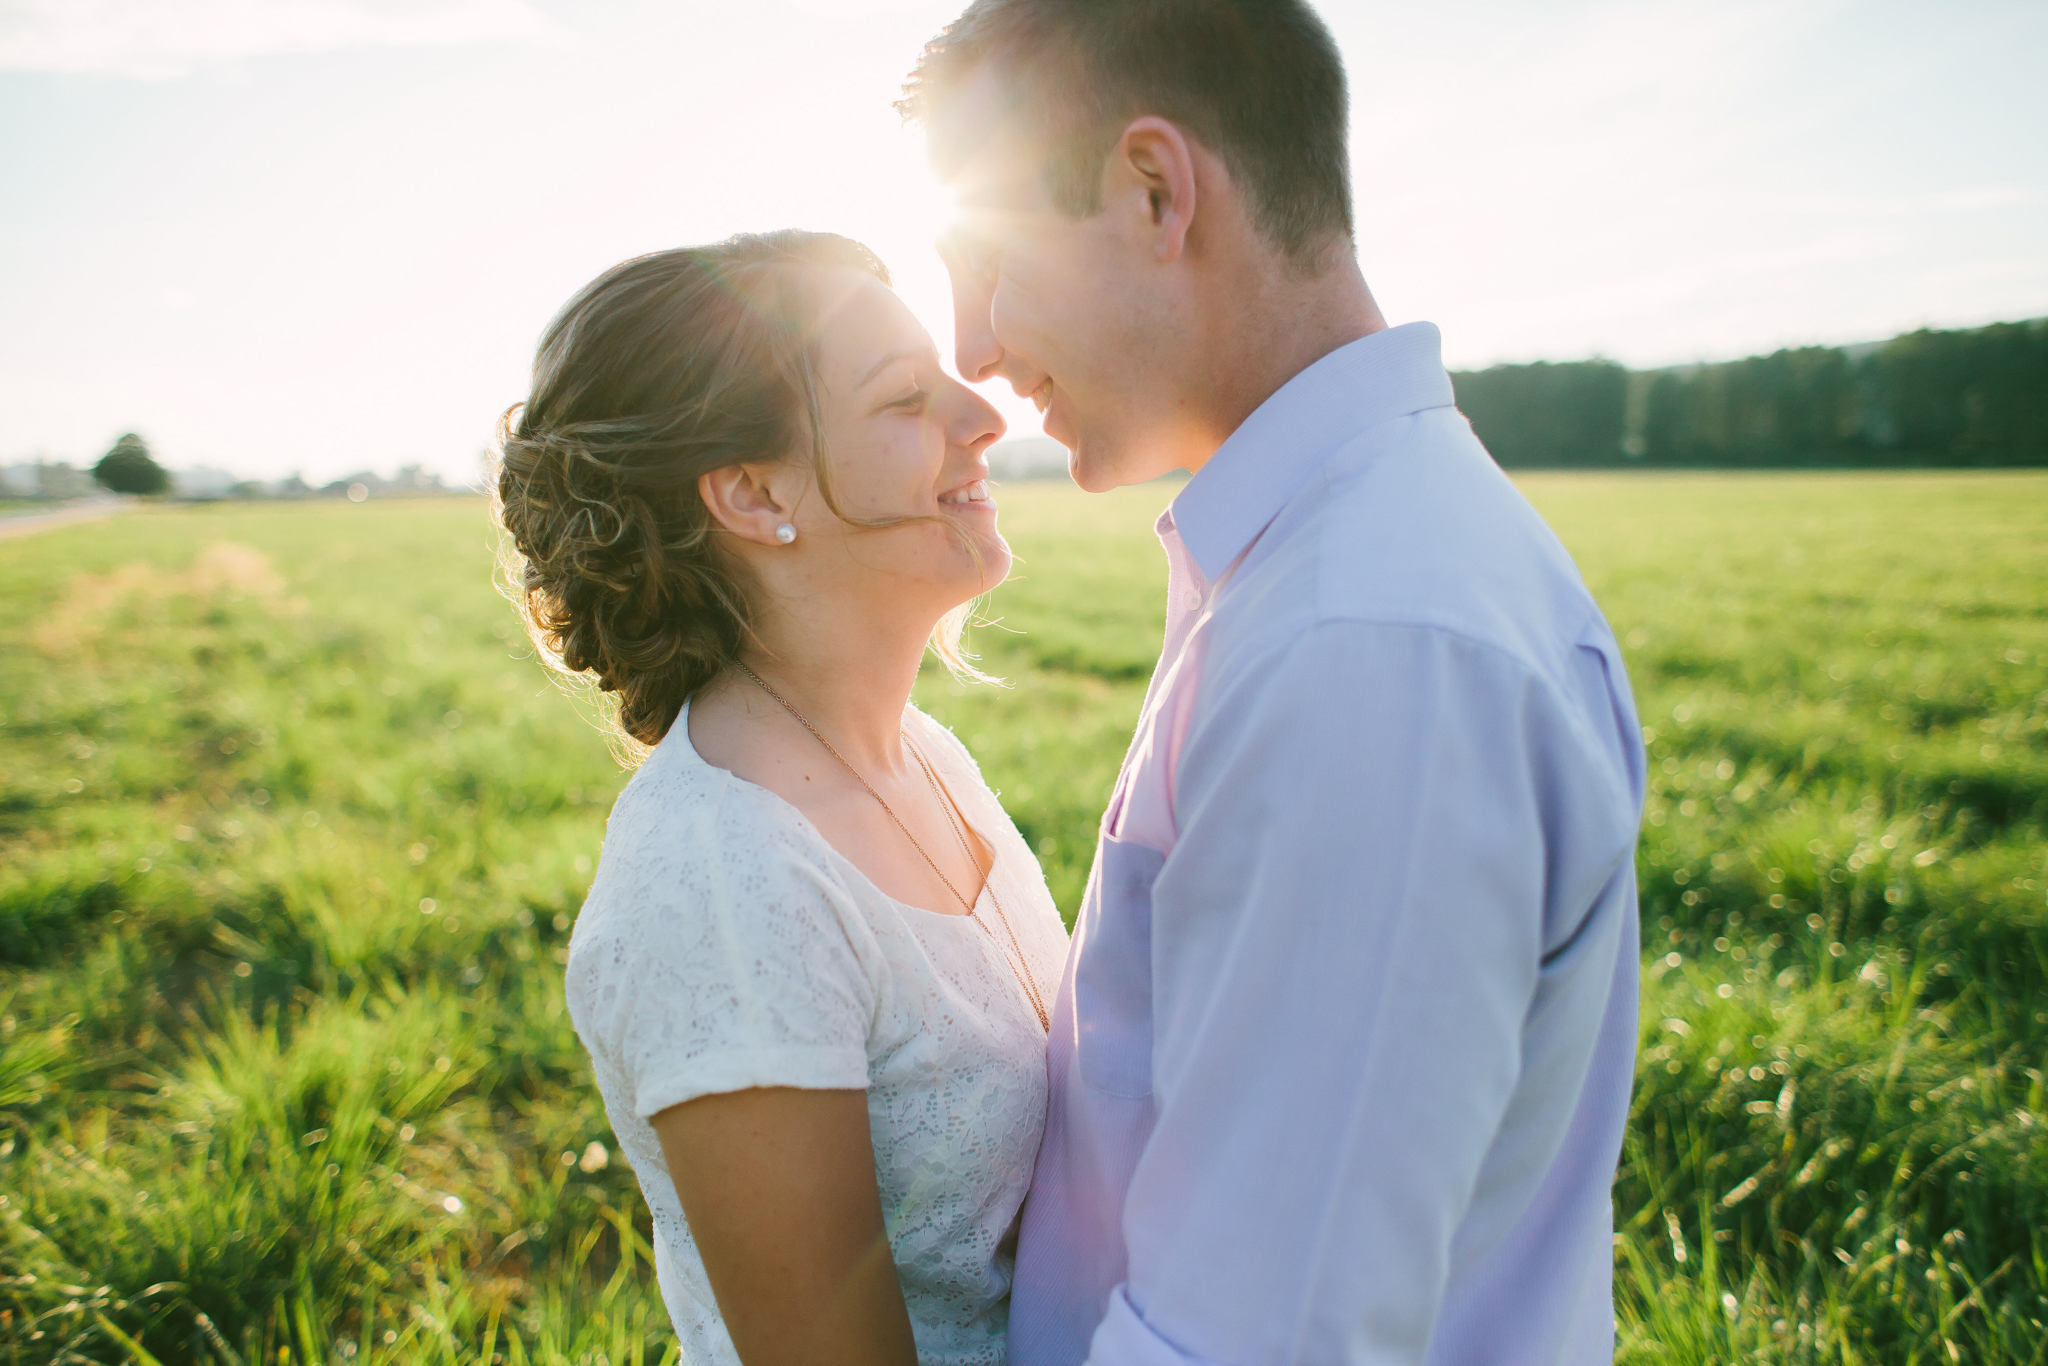 View More: http://michellekarstphotography.pass.us/timnaomiengagement